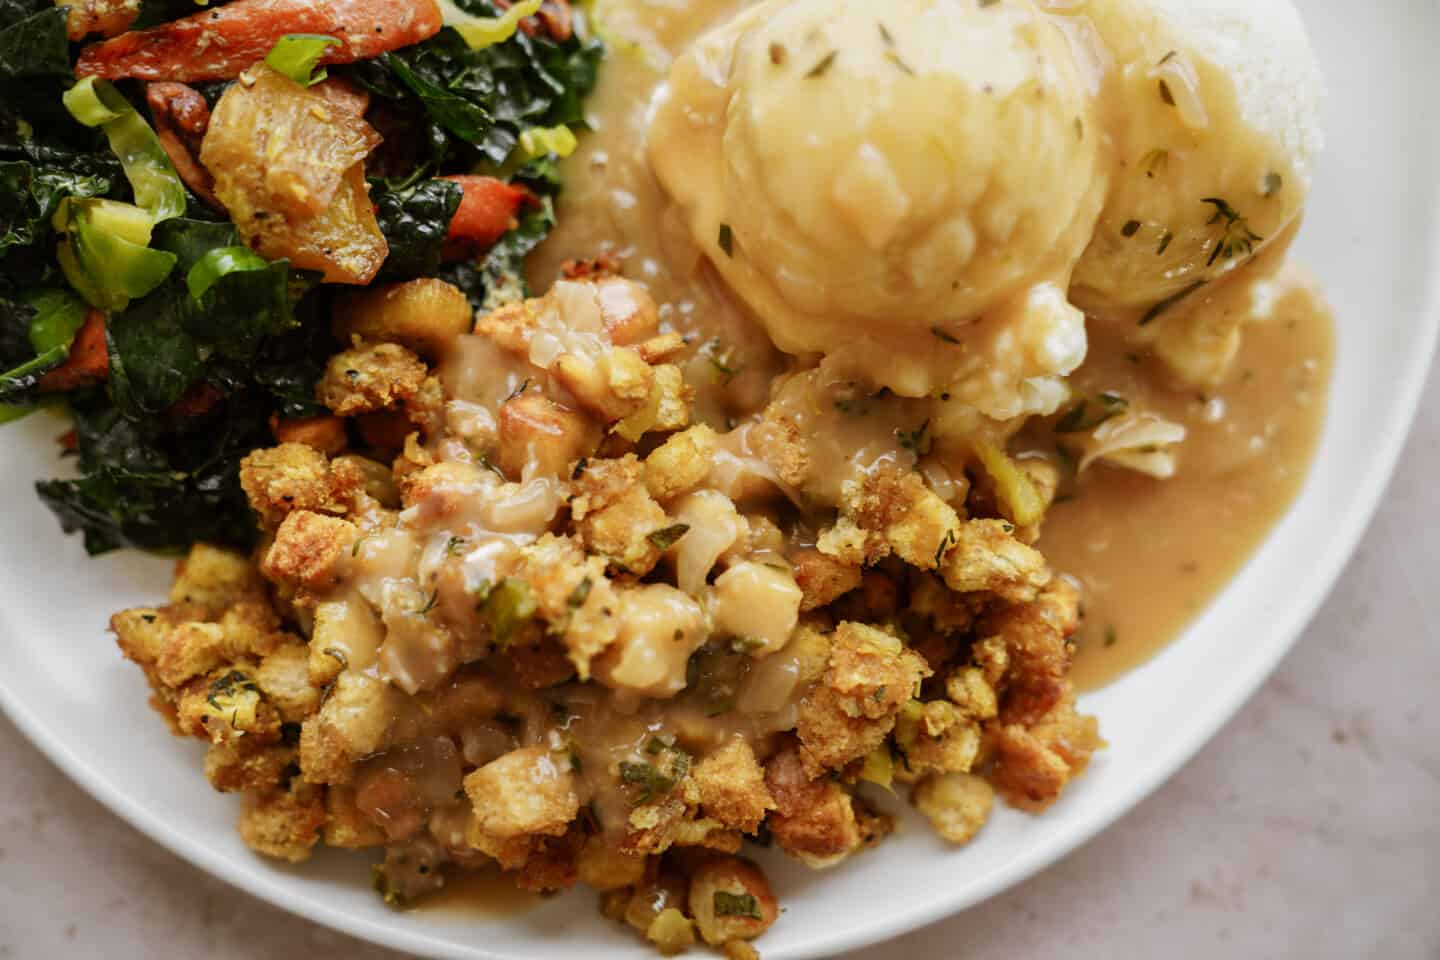 Recipes Using Boxed Stuffing